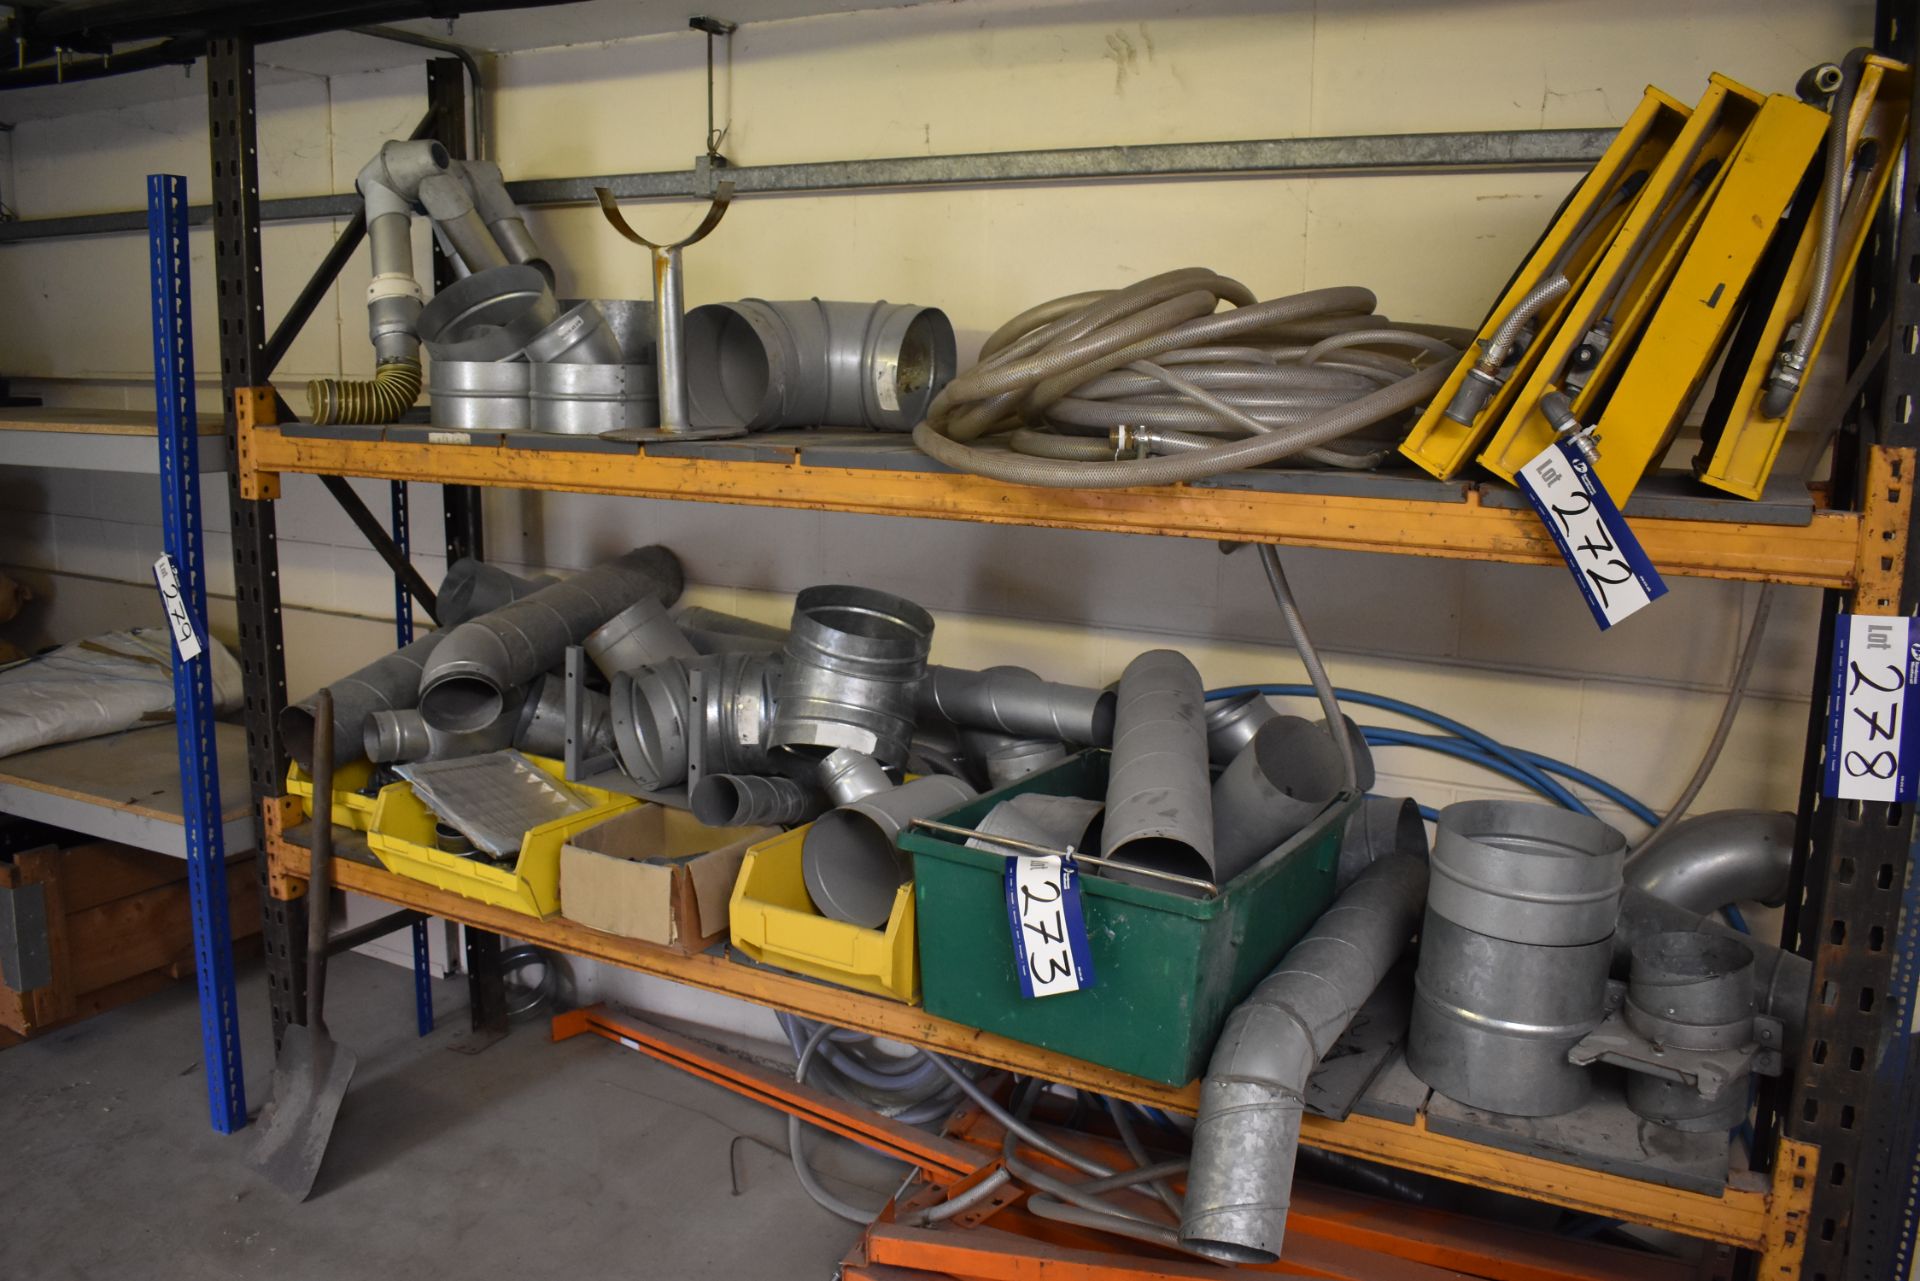 Quantity of Ducting as set out on shelf